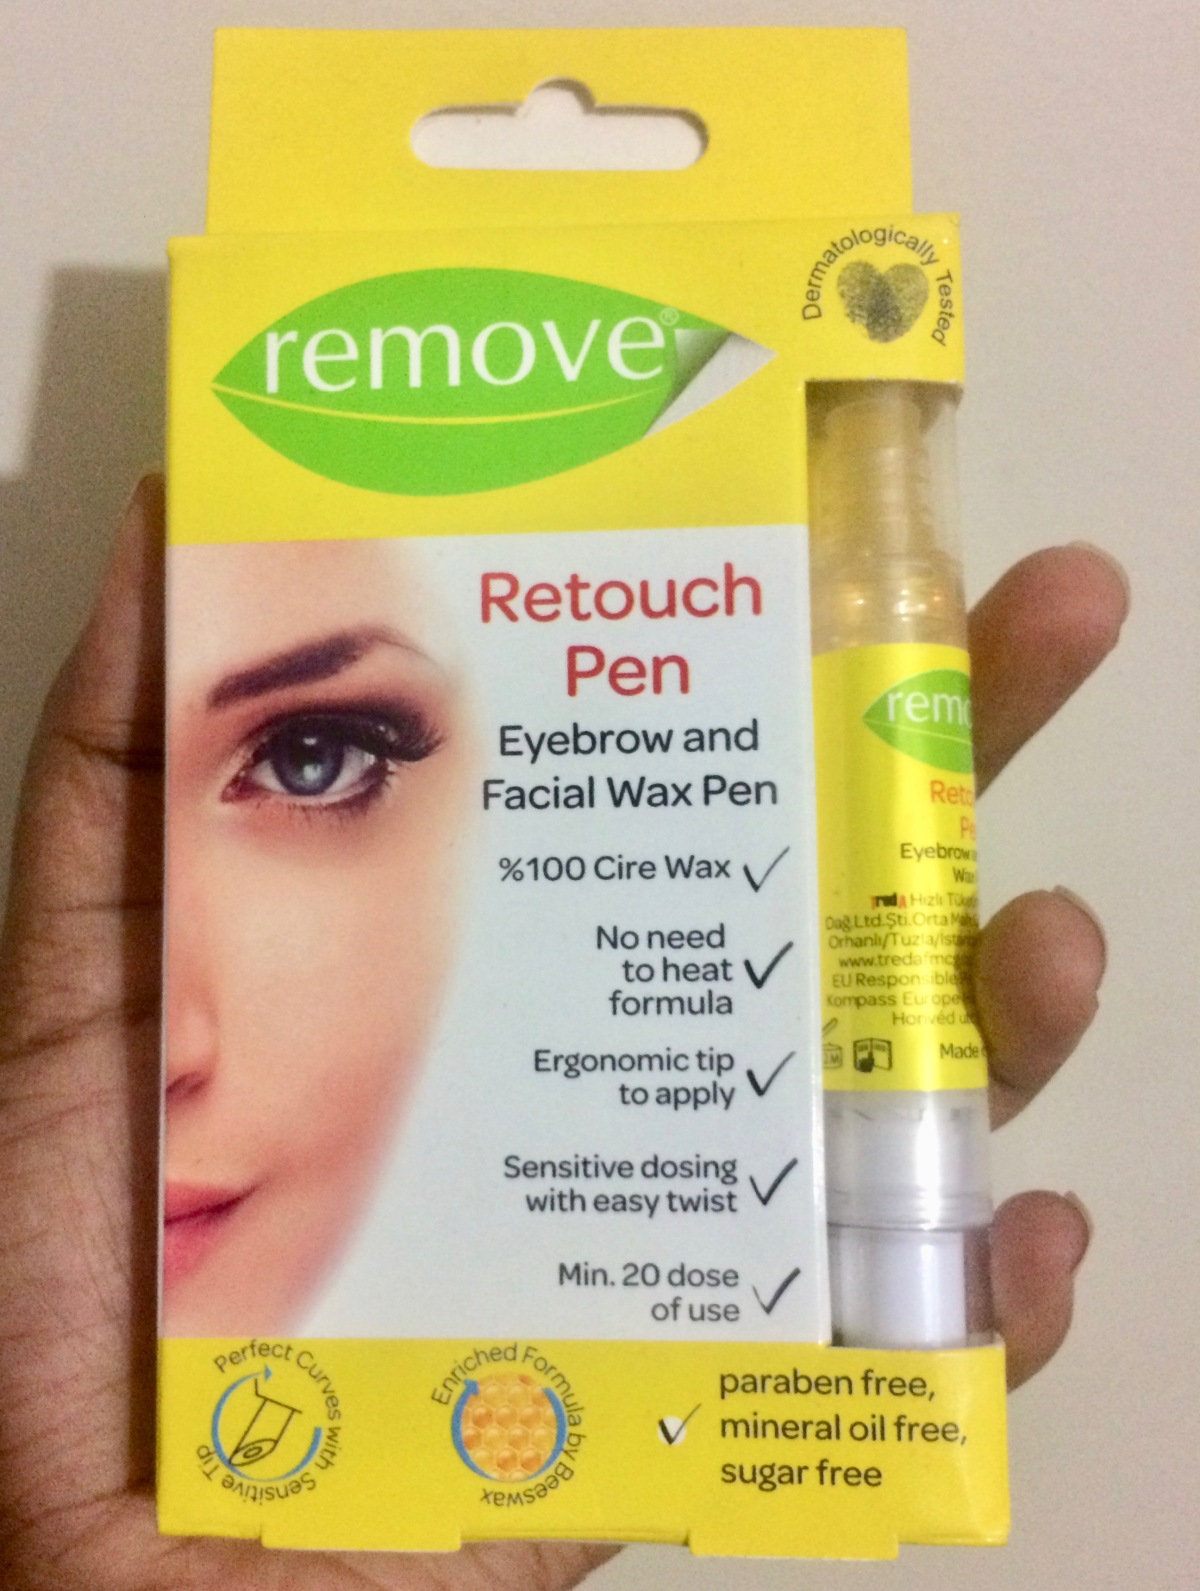 FACIAL LIPOSOLUBLE WAX - RETOUCH PEN FROM REMOVE